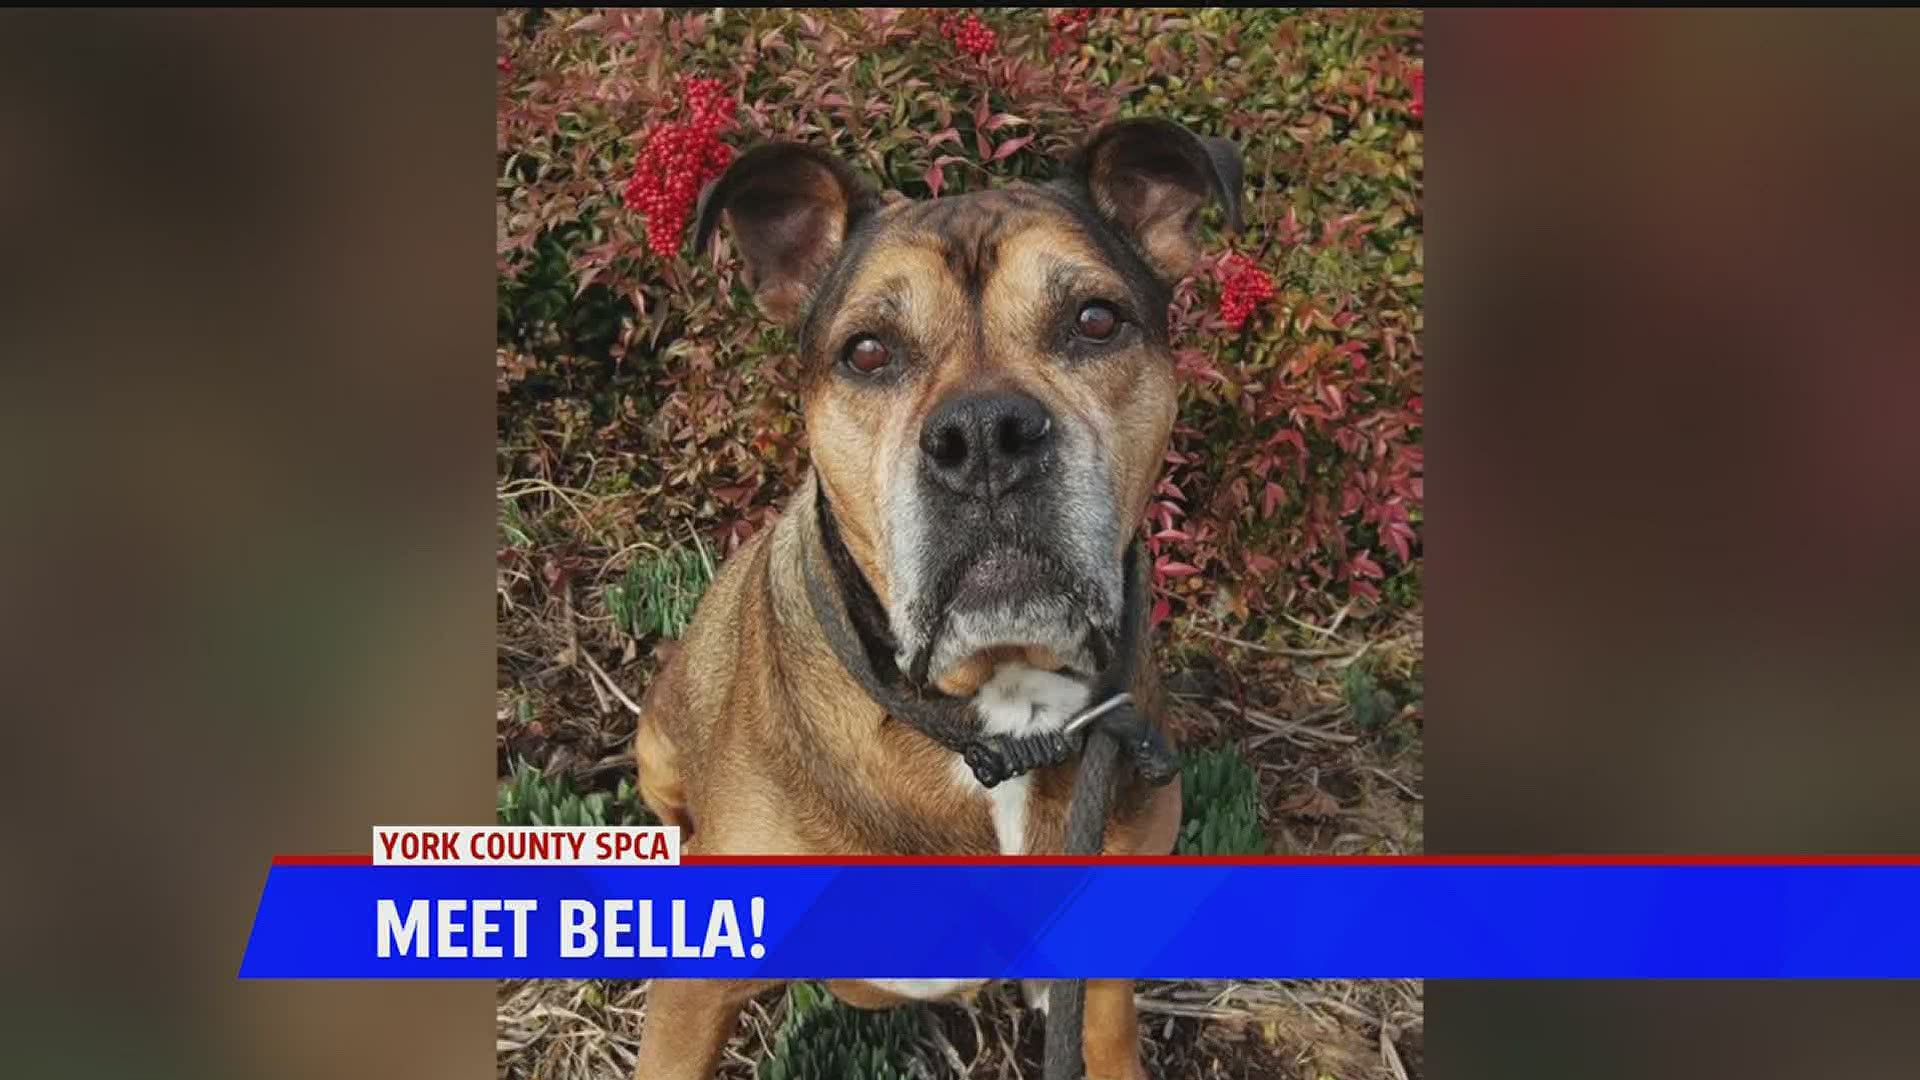 Today's furry friend is brought to you by the York County SPCA, call to reserve an appointment to adopt Bella today